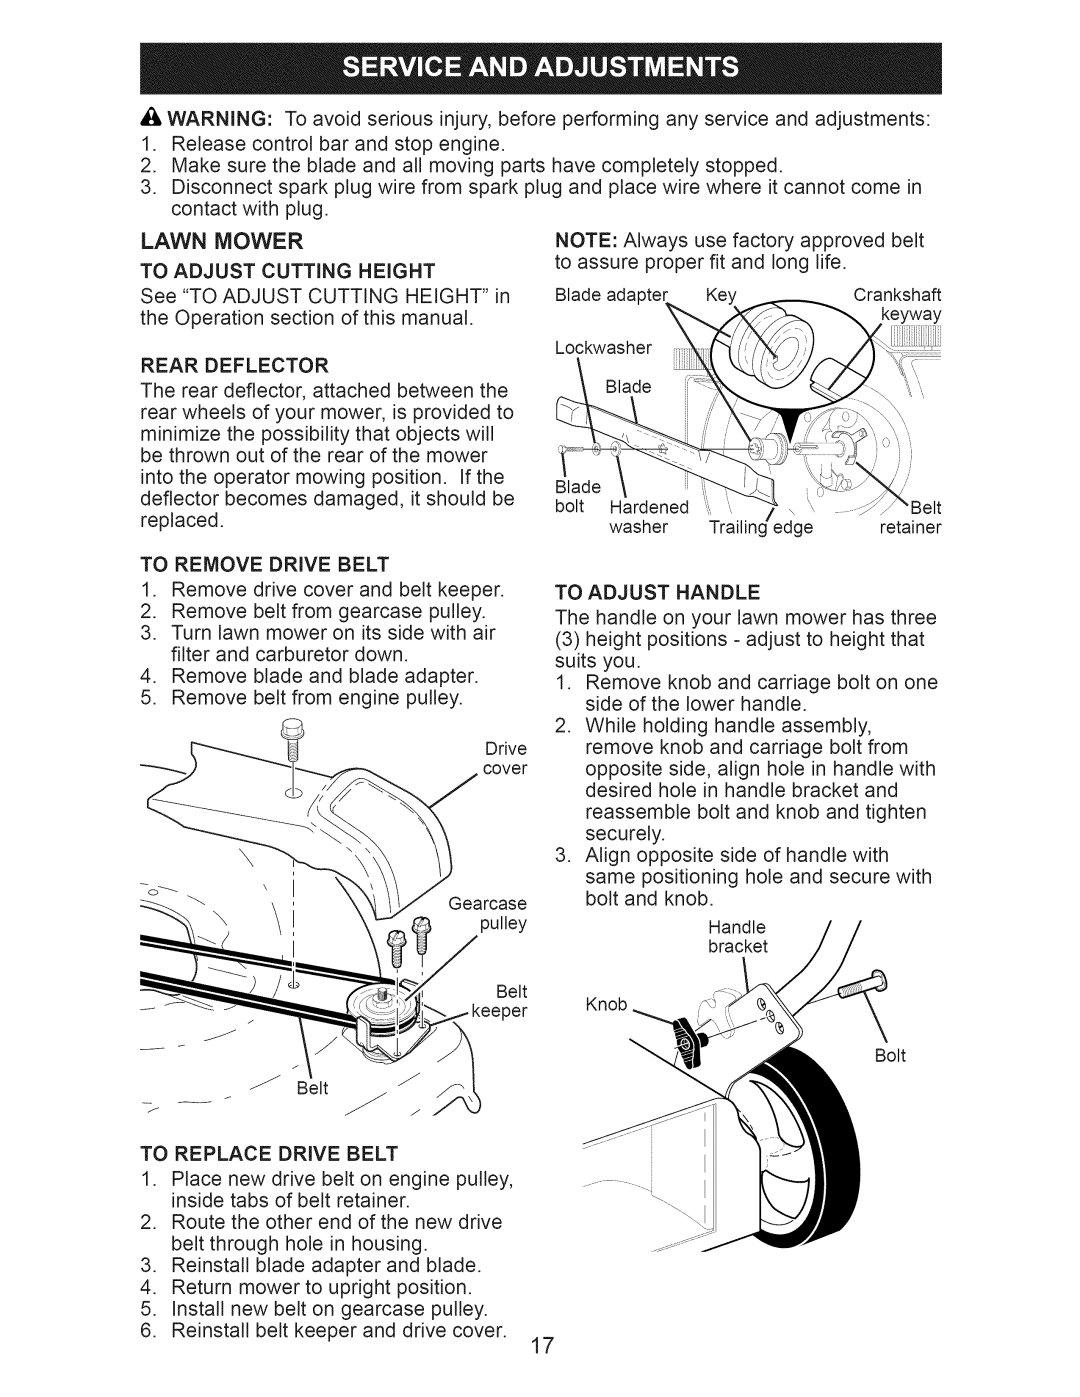 Craftsman 917.376533 owner manual Lawn Mower To Adjust Cutting Height 